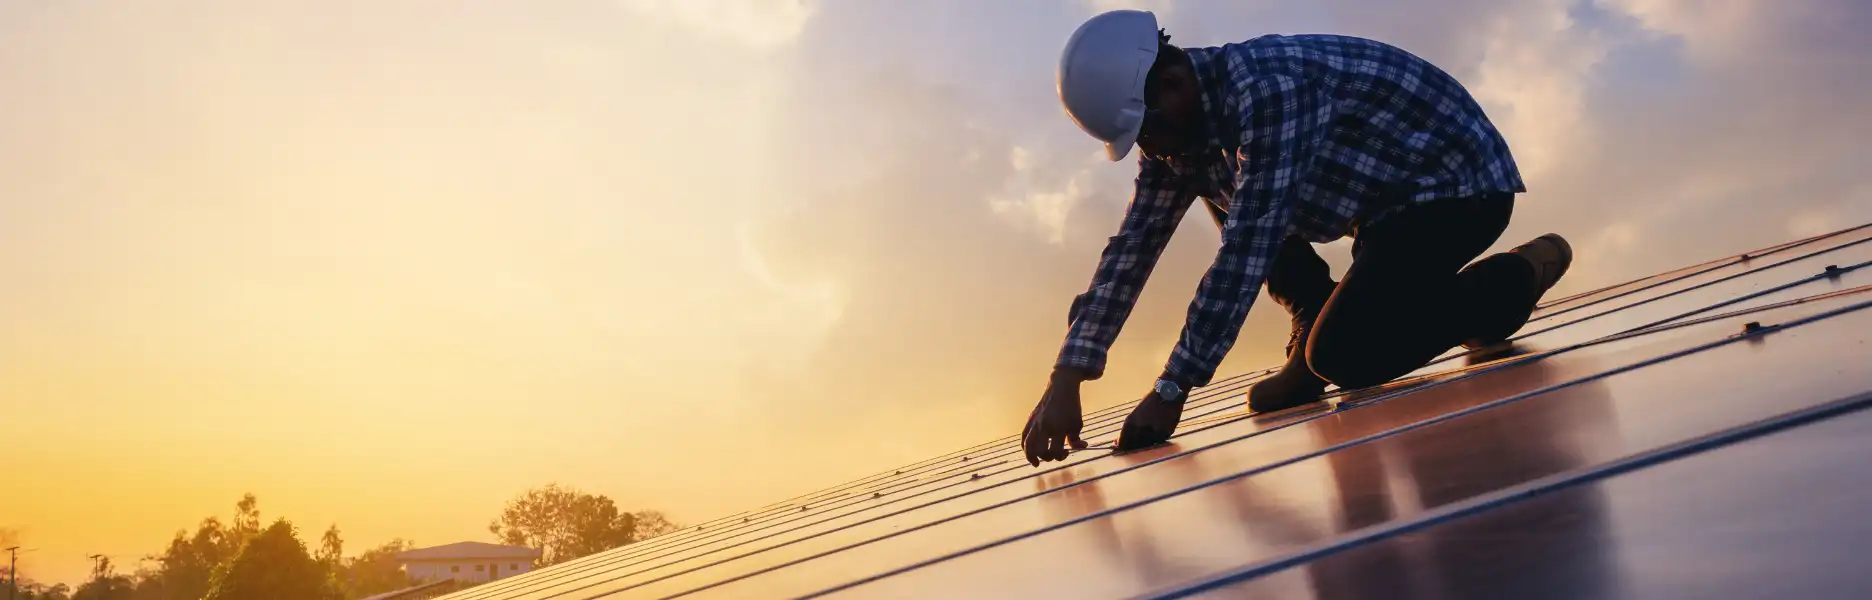 A technician in a hard hat and plaid shirt installing solar panels on a rooftop at sunset, with the sky fading from warm orange to deep blue.